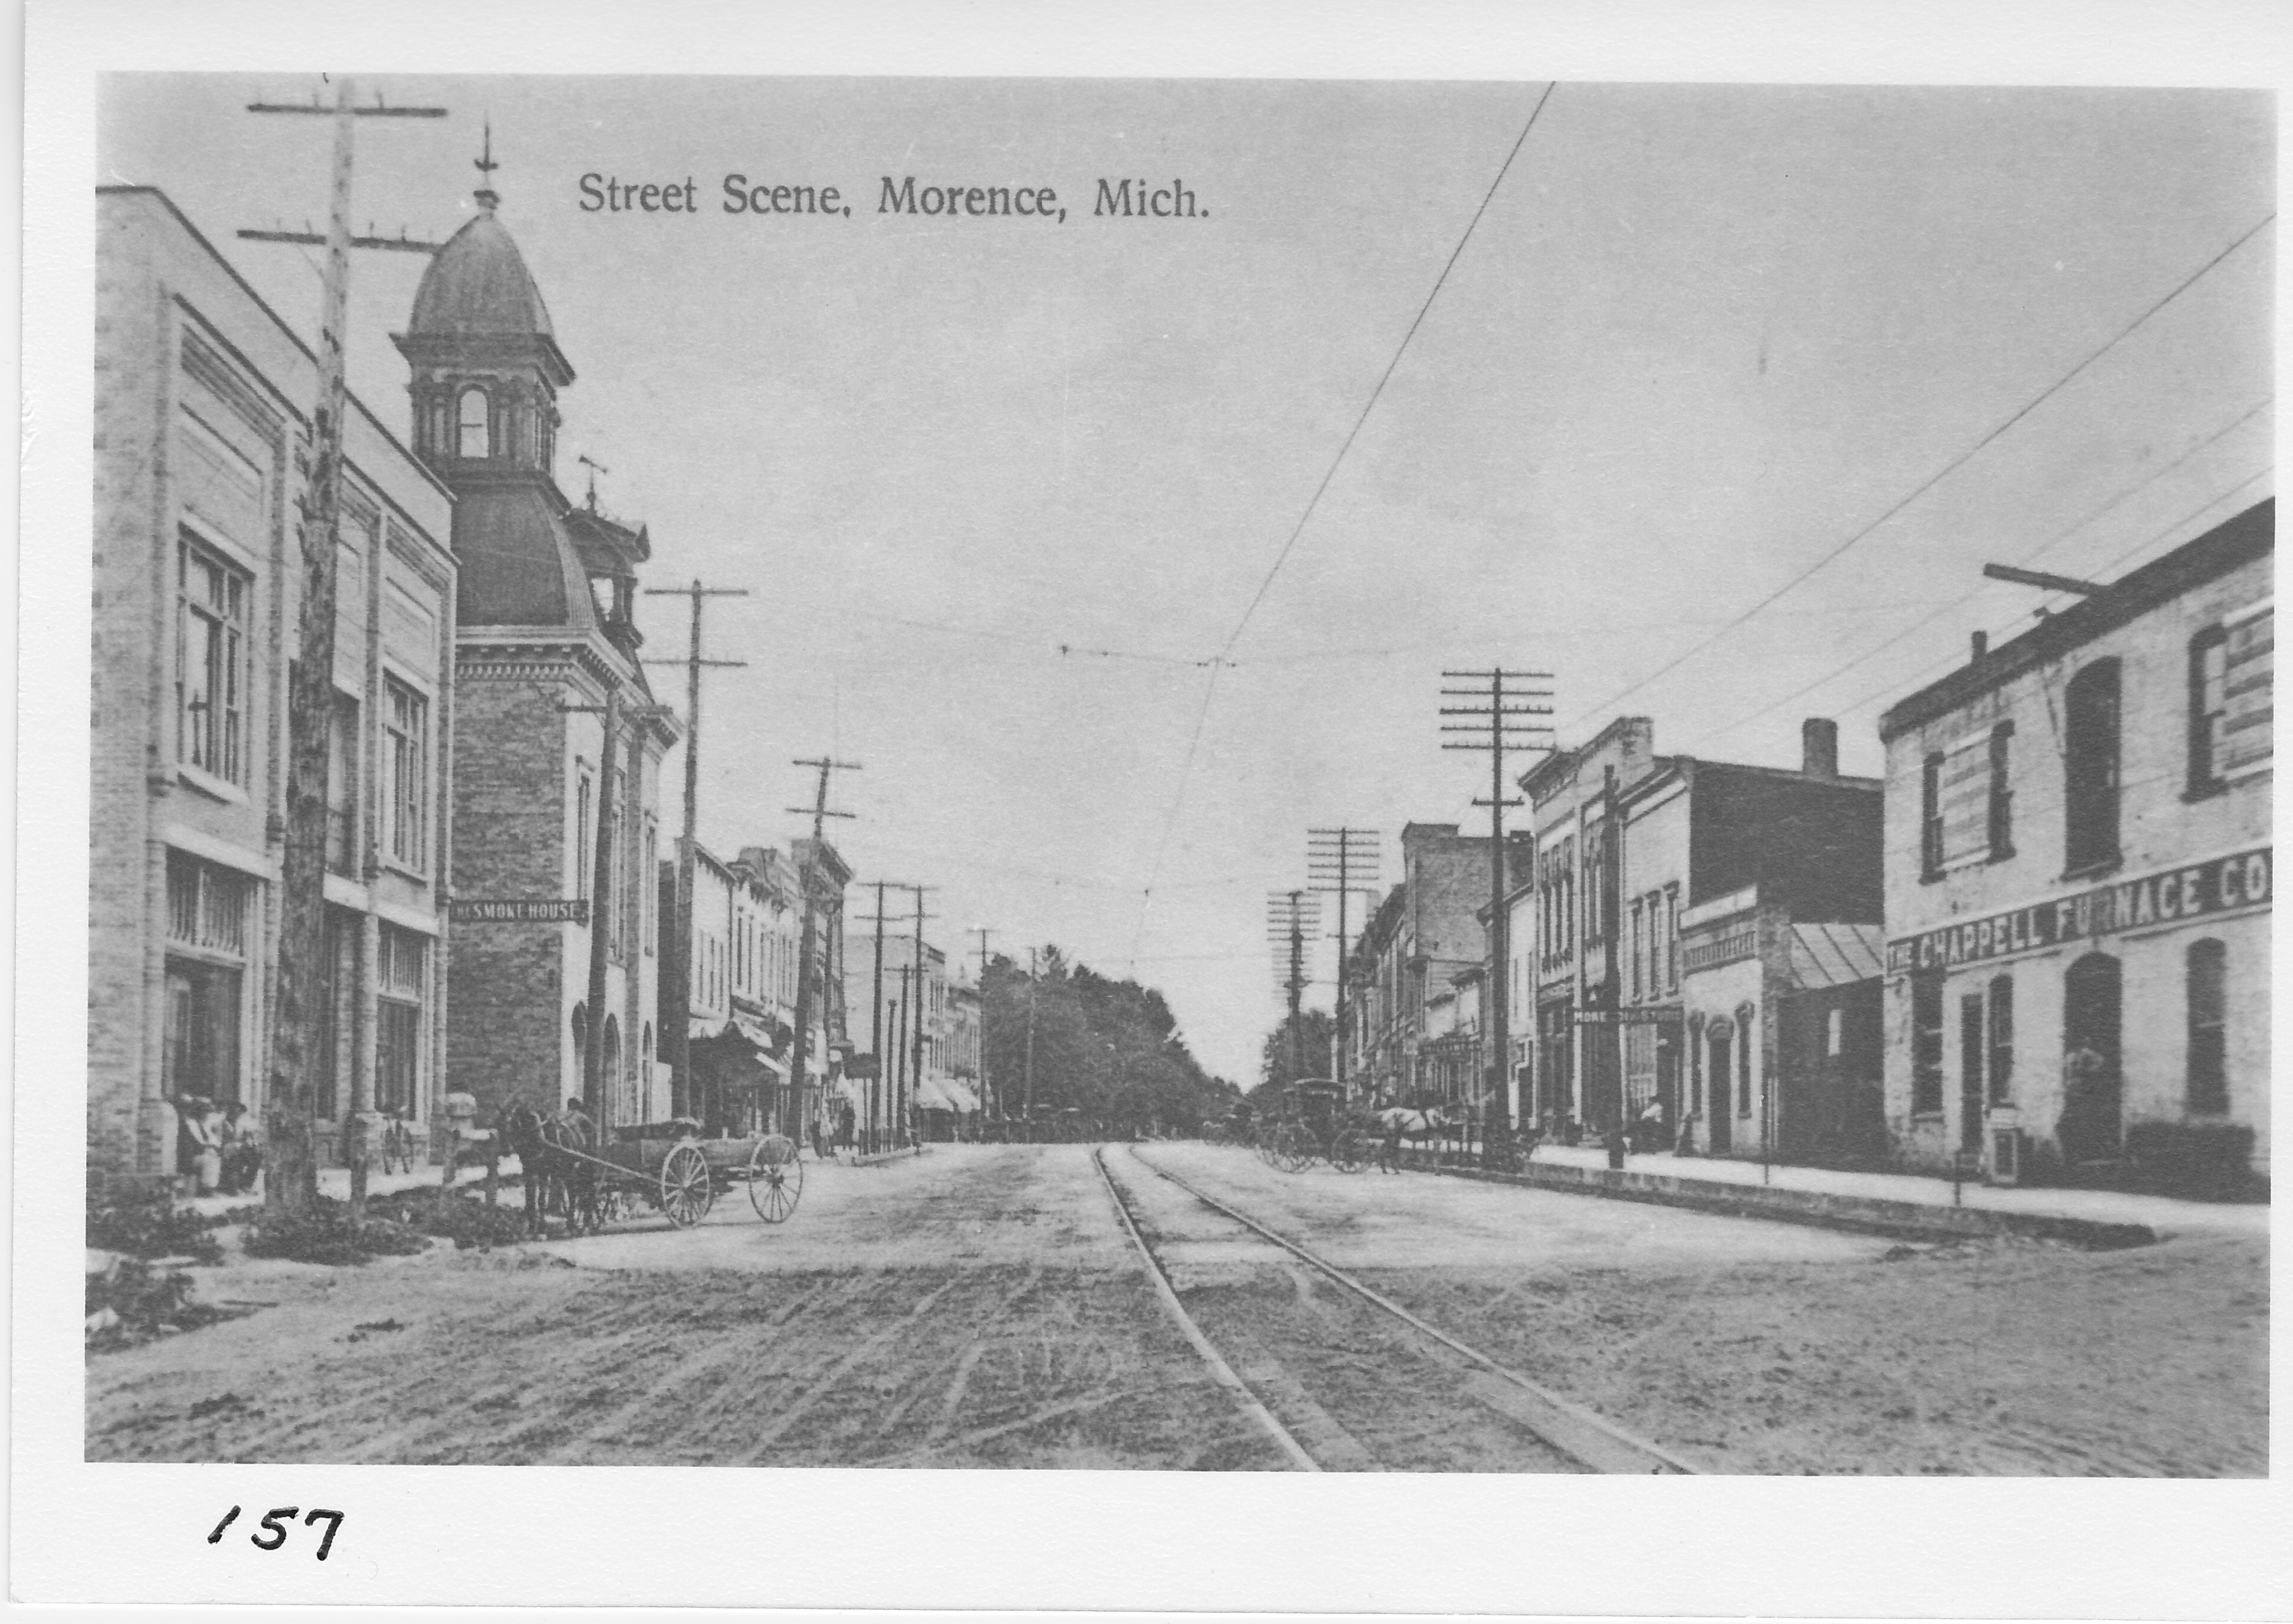 Main Street looking east from Snow Building and Chappell Foundry about 1908.